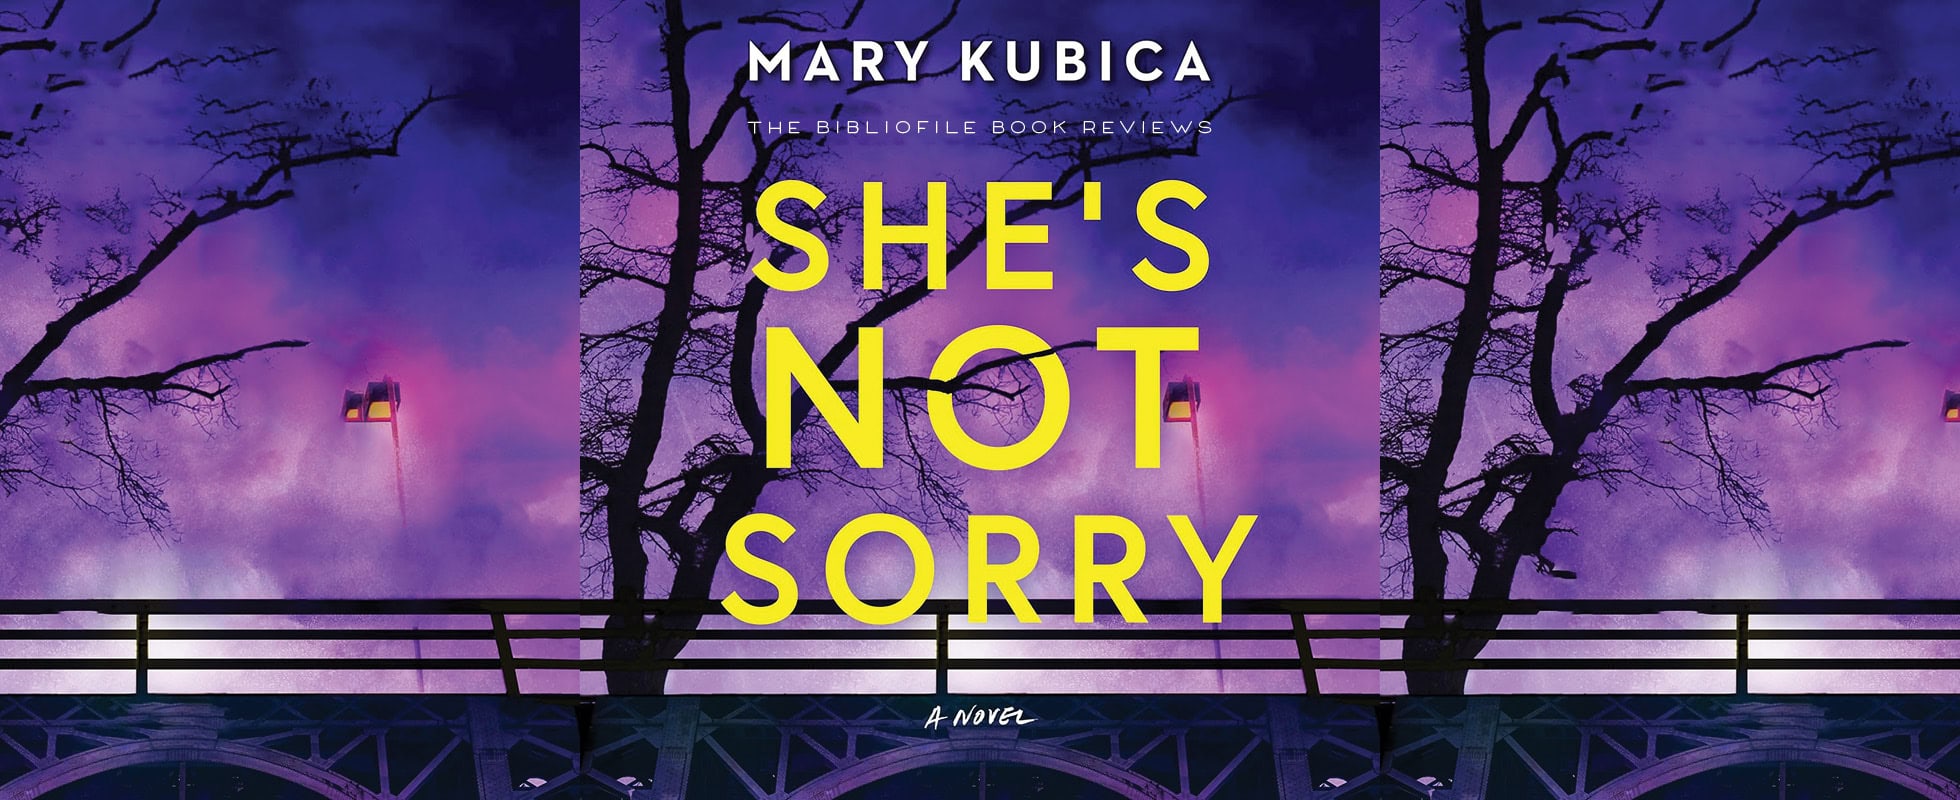 she's not sorry by mary kubica book review plot summary synopsis recap discussion spoilers